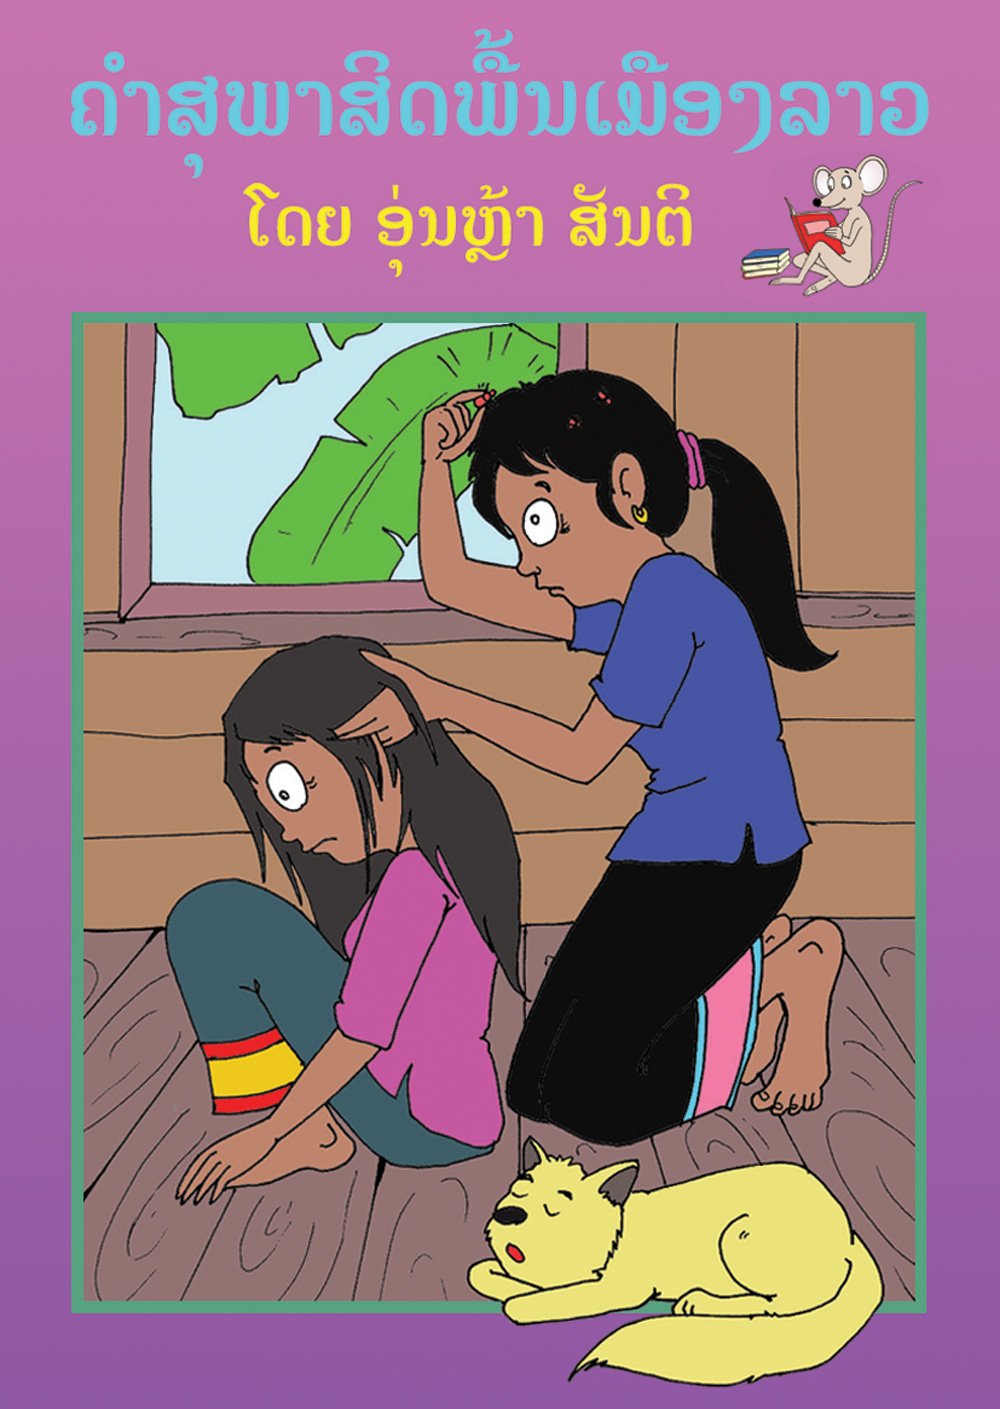 Lao Proverbs - Small (color) large book cover, published in Lao language